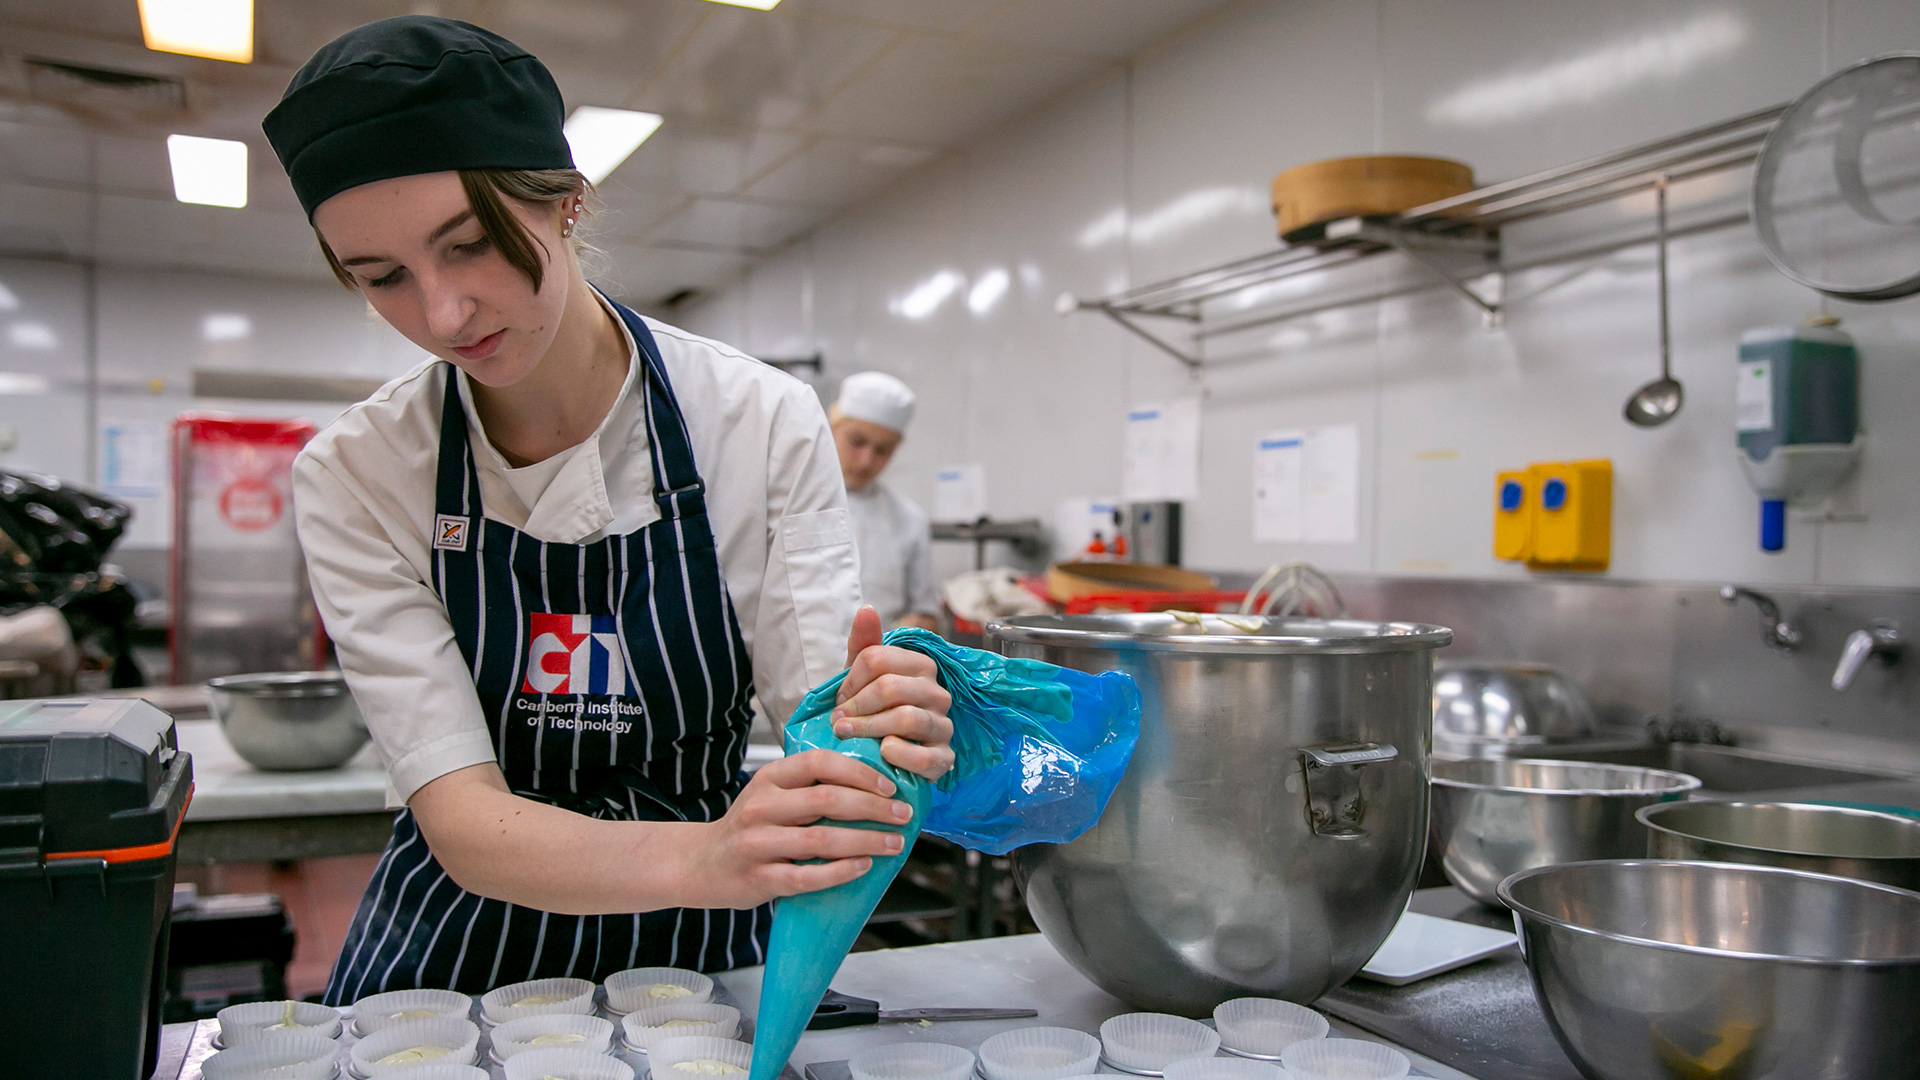 A young woman holds a piping bag in a commercial kitchen.